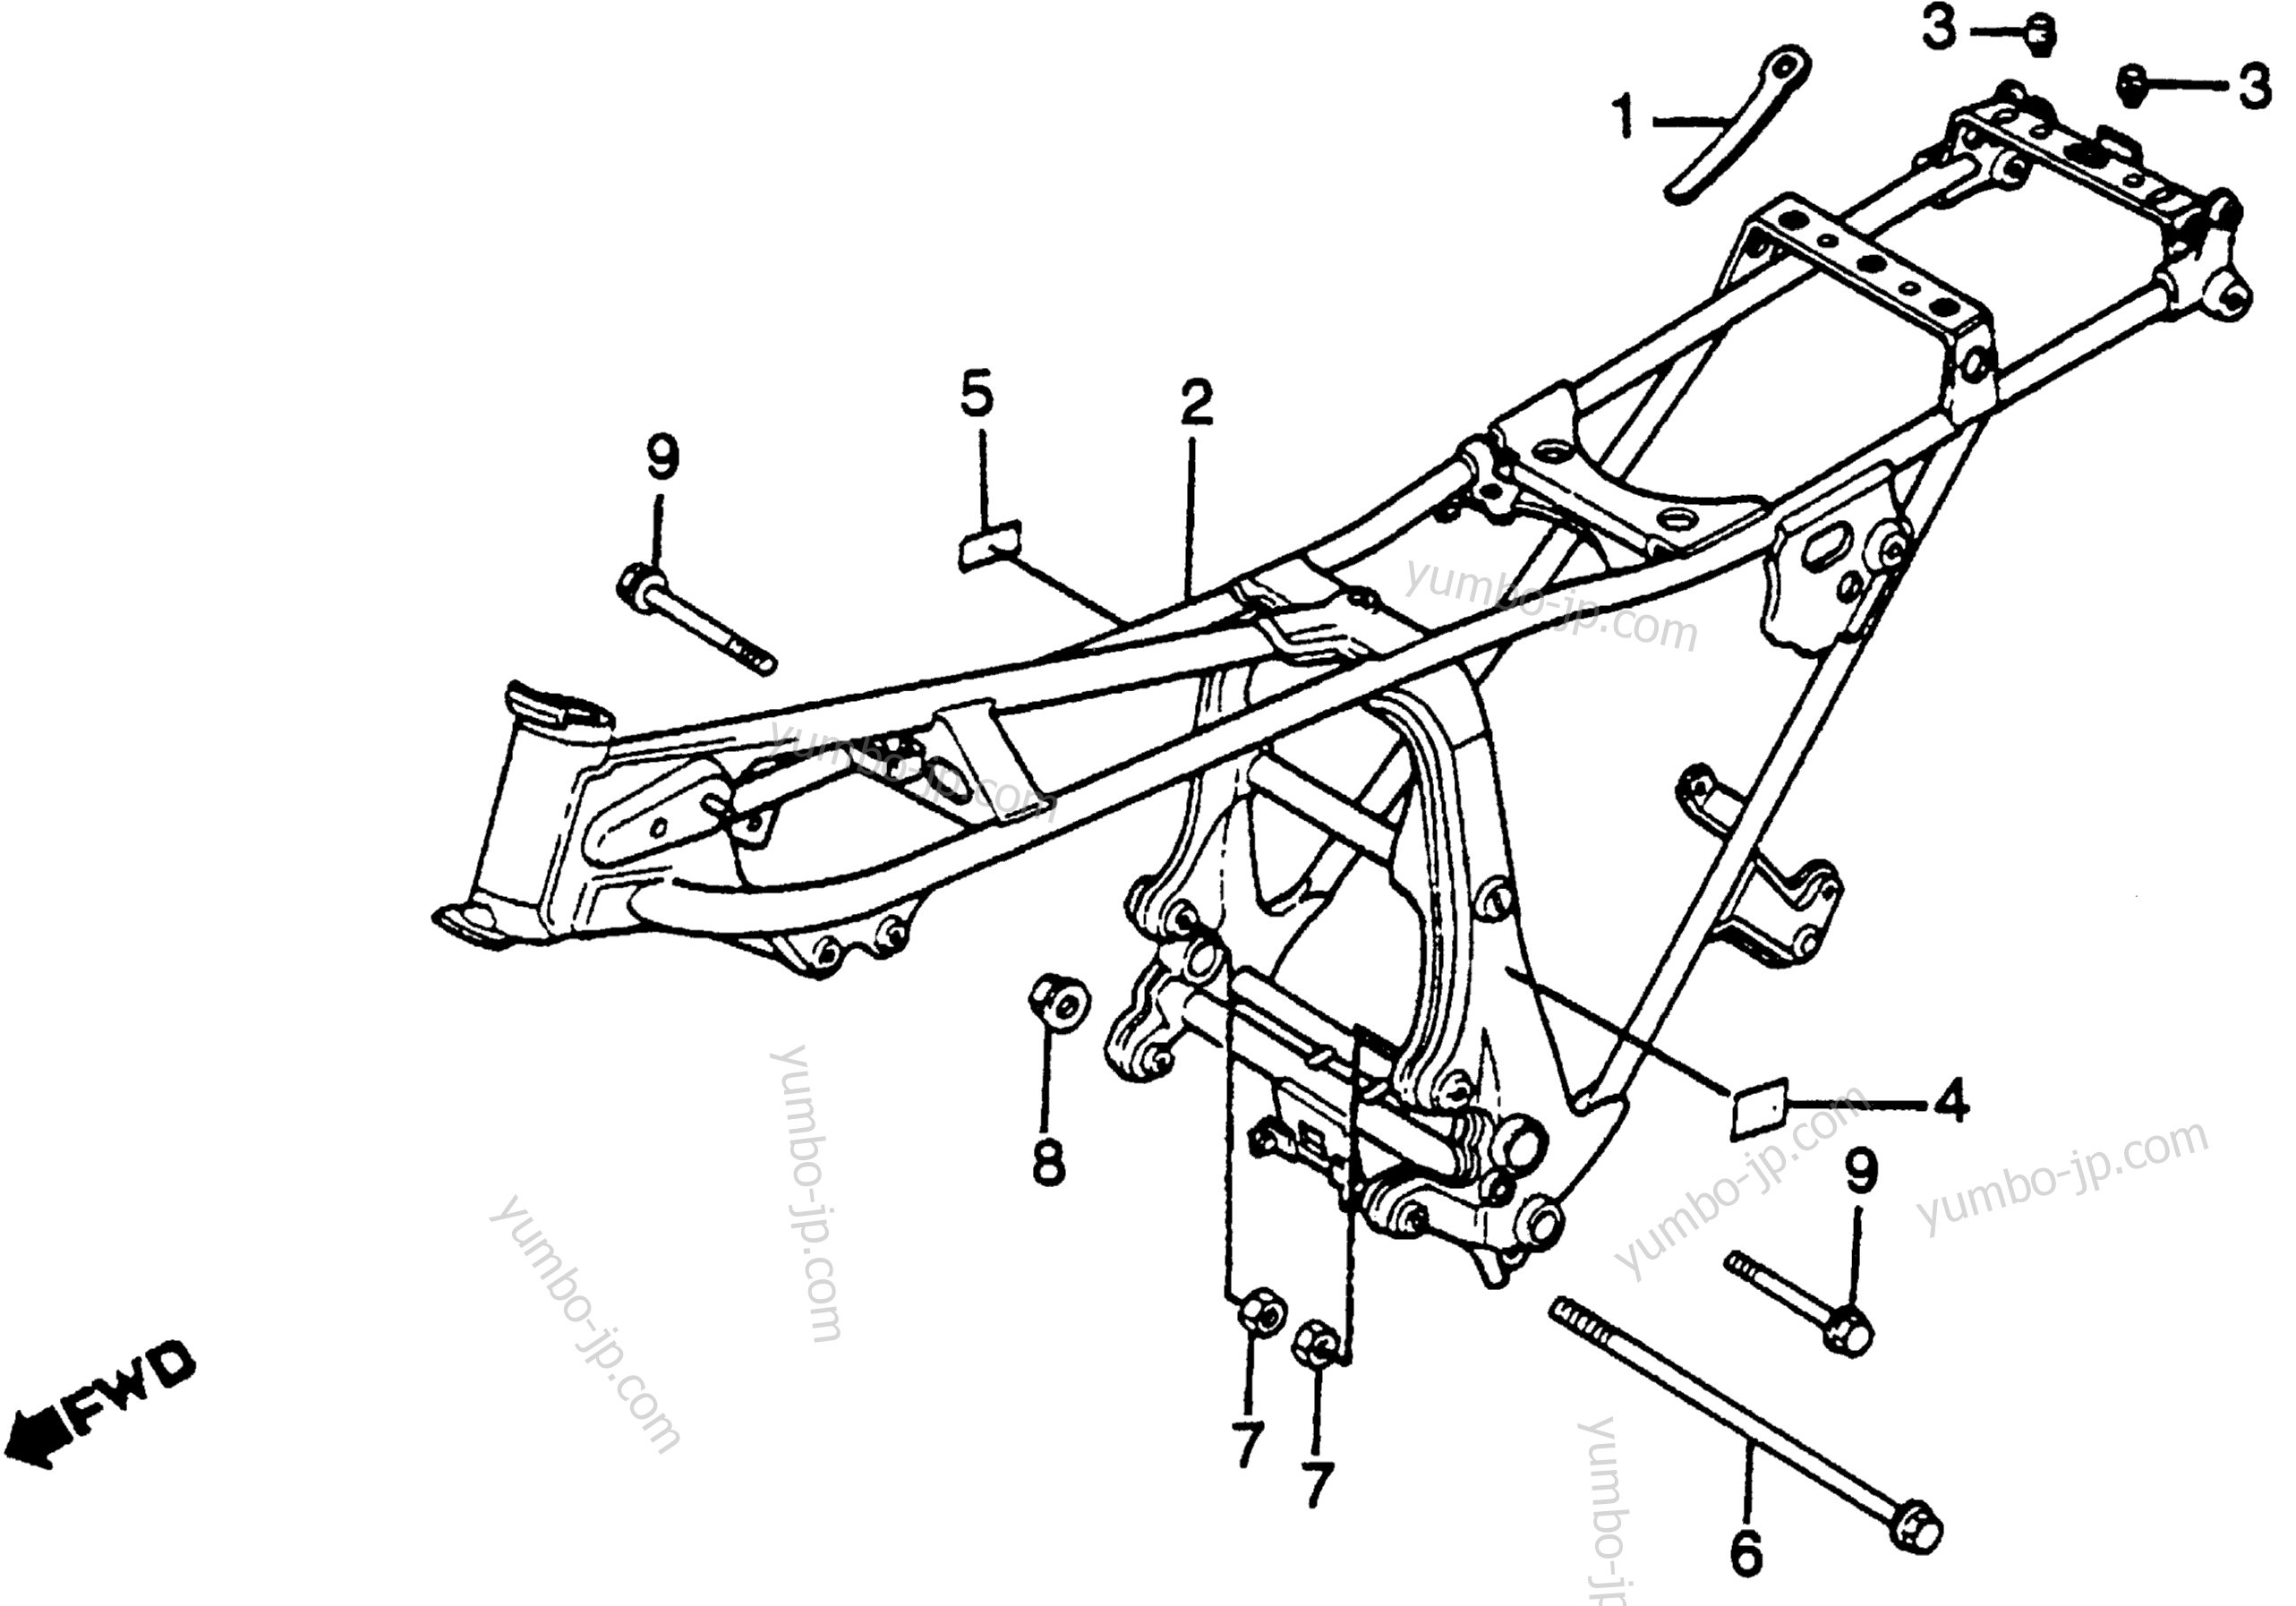 FRAME for motorcycles HONDA GL650 A 1983 year